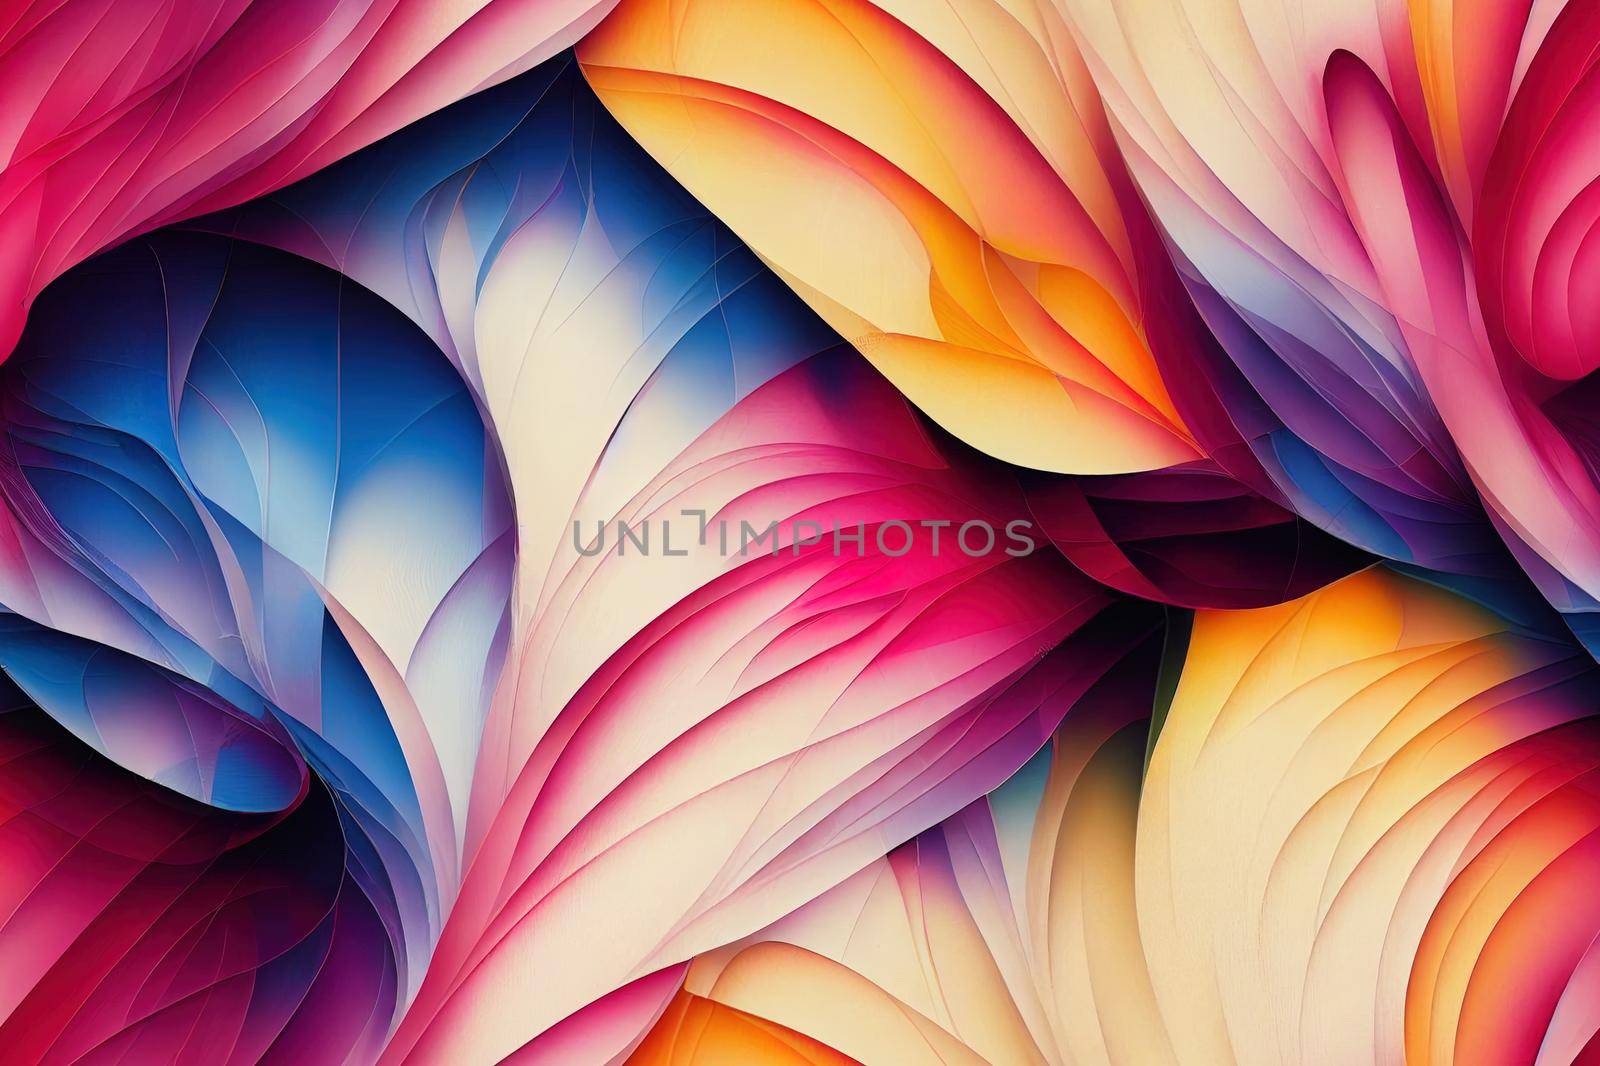 Brush moving stylized floral background moving colorful fabric patterns